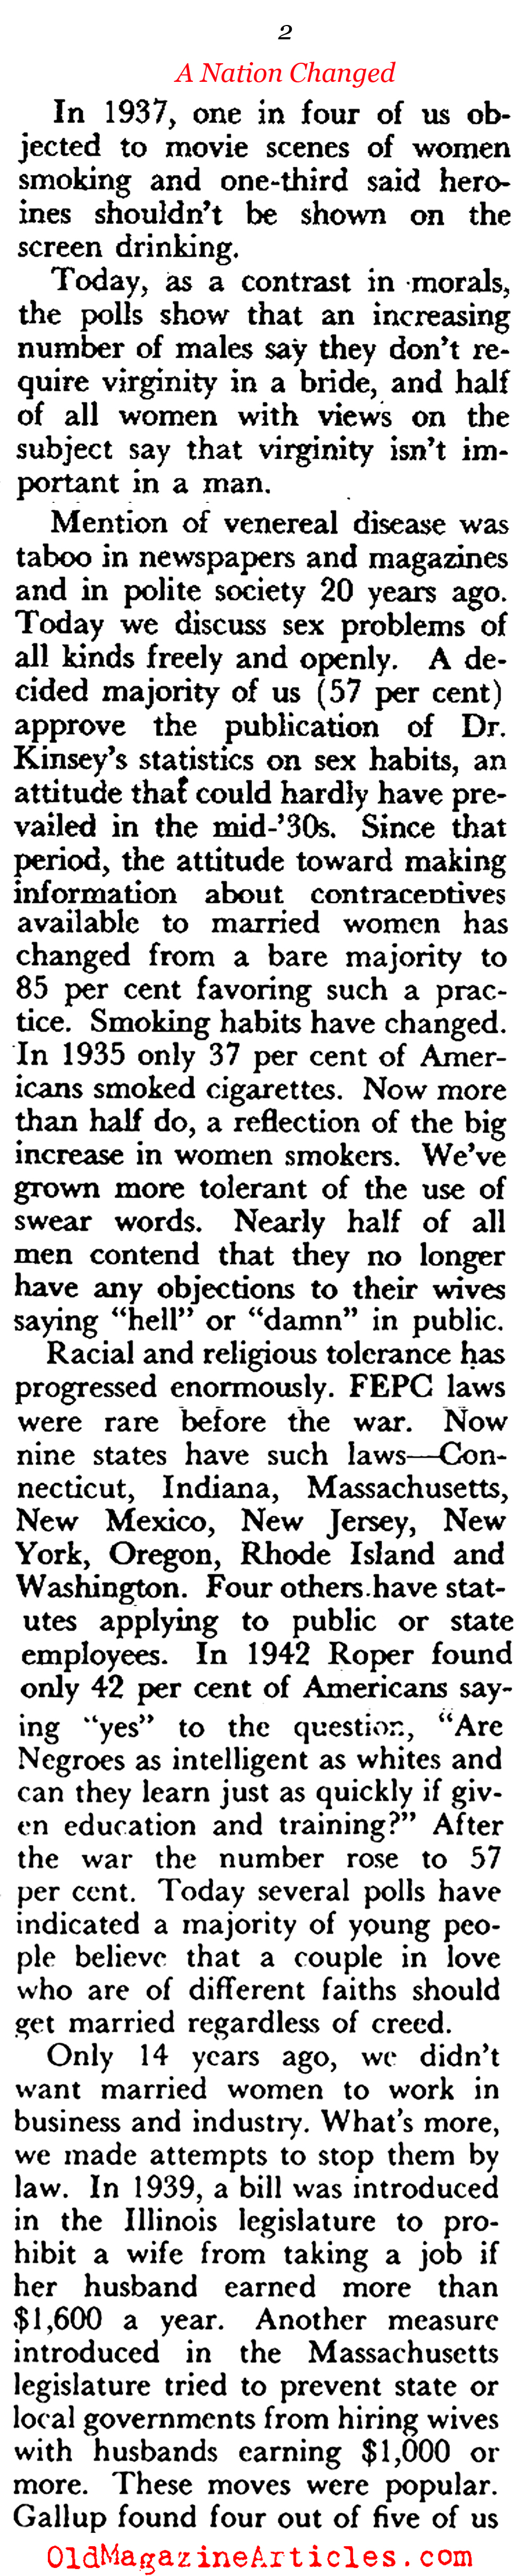 America's Ever-Changing Mind: 1929 - 1952 (Pageant Magazine, 1953)